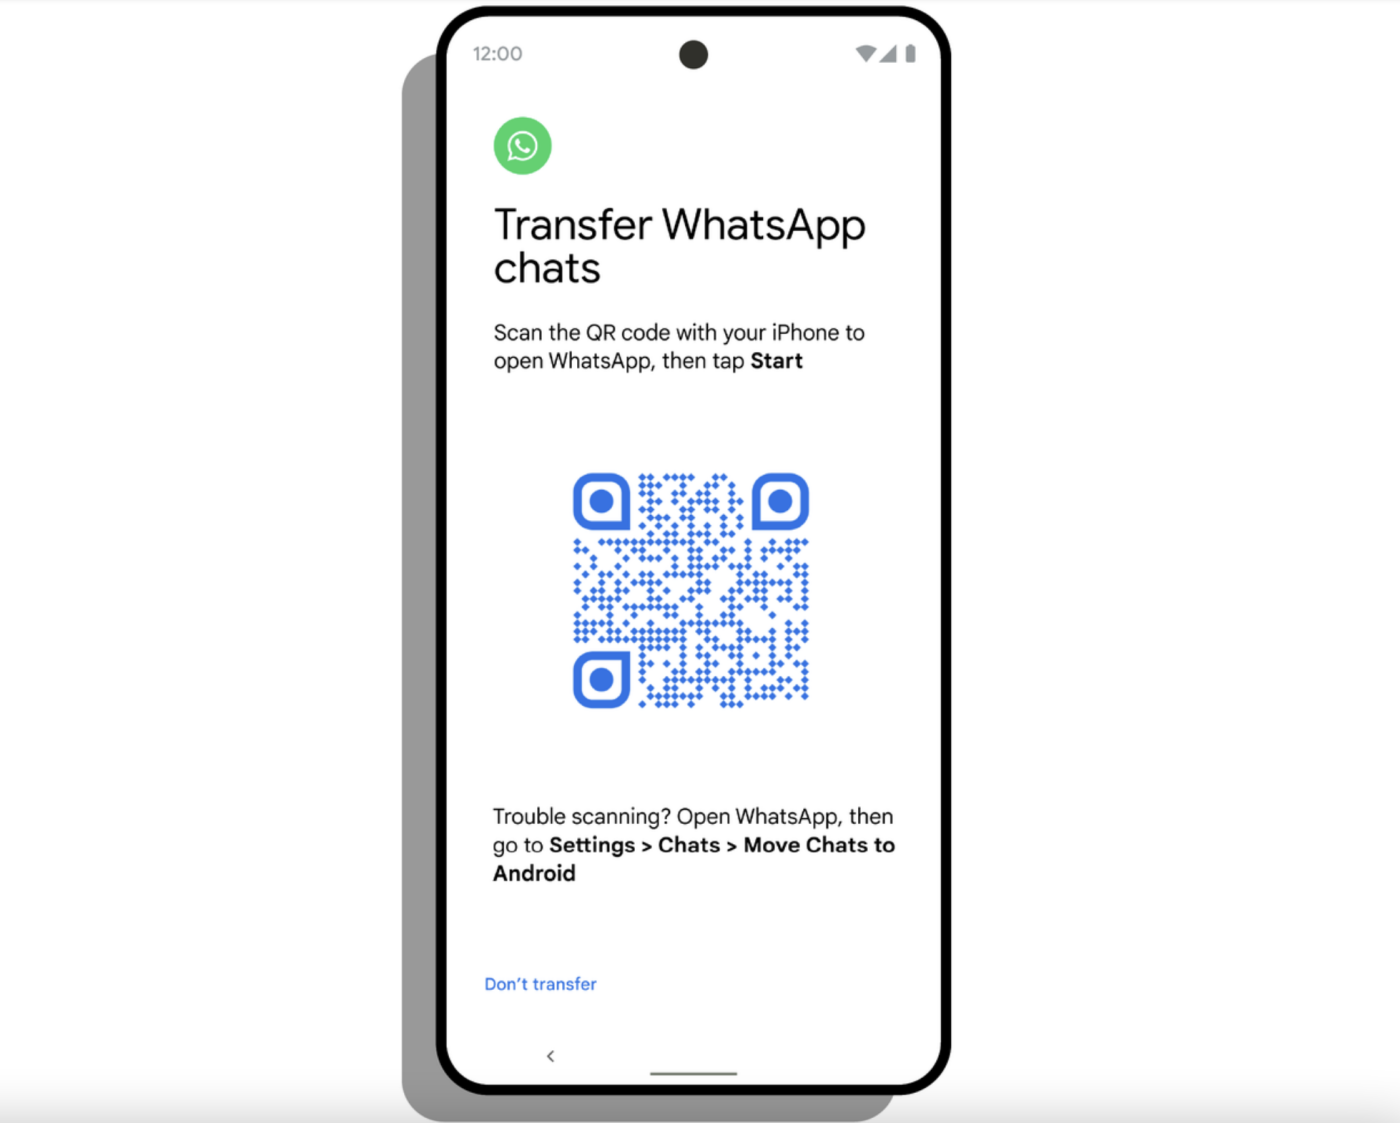 Bring your WhatsApp chat history to Android.